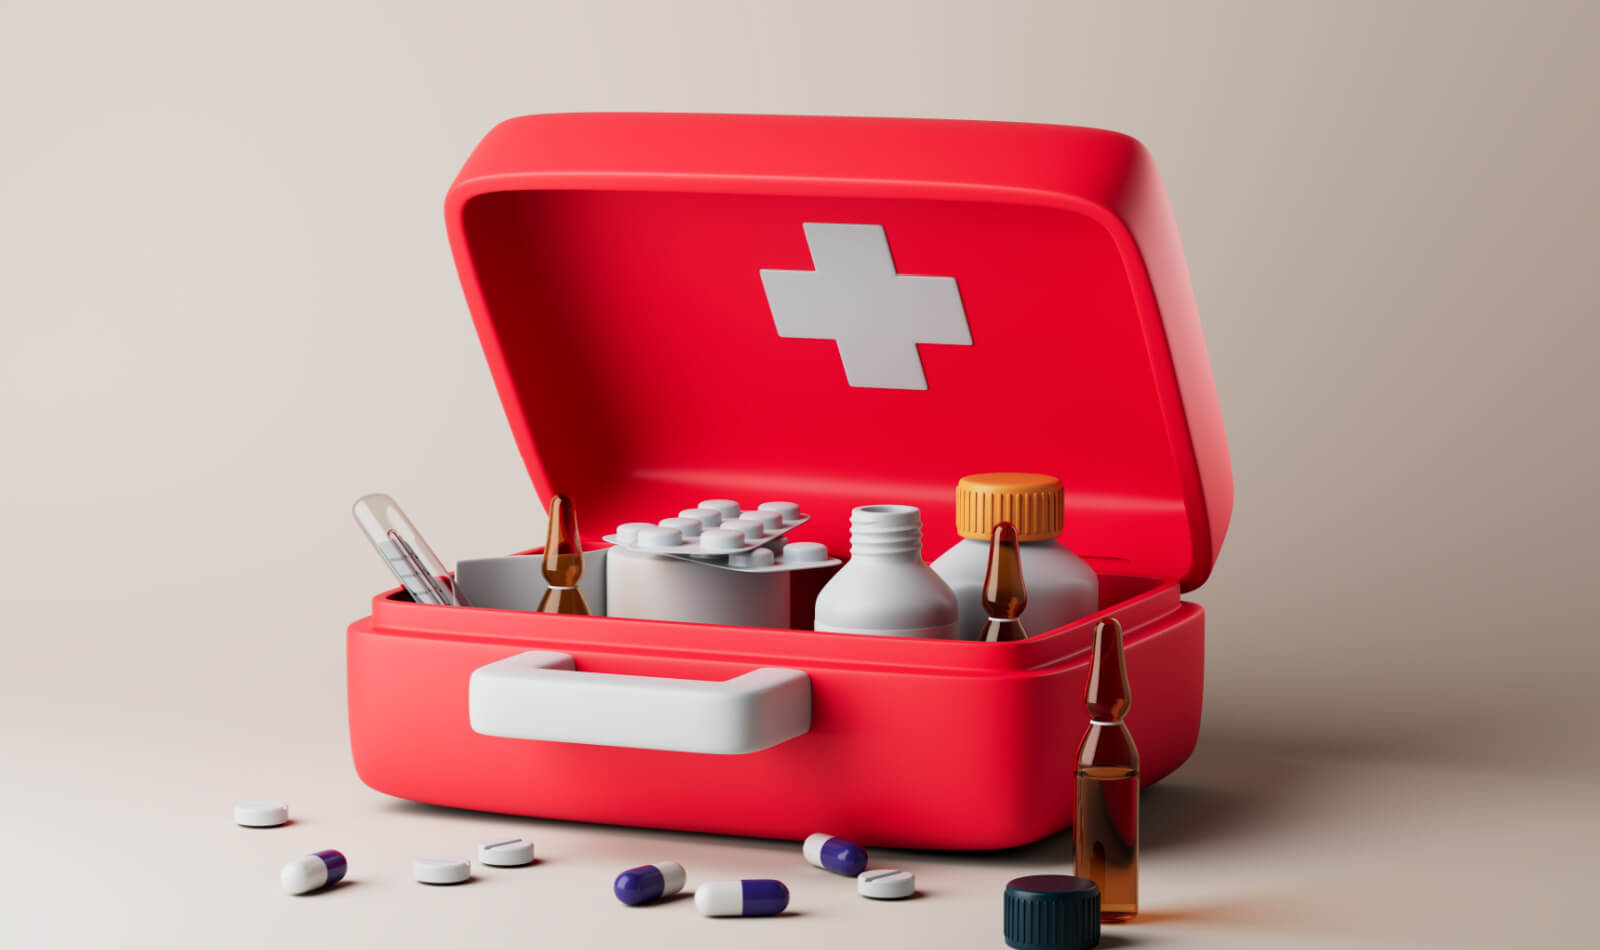 Simple open red first aid kit with with medicines for drugstore category on floor 3d render illustration.. Consept για κουίζ που αφορούν τις πρώτες βοήθειες